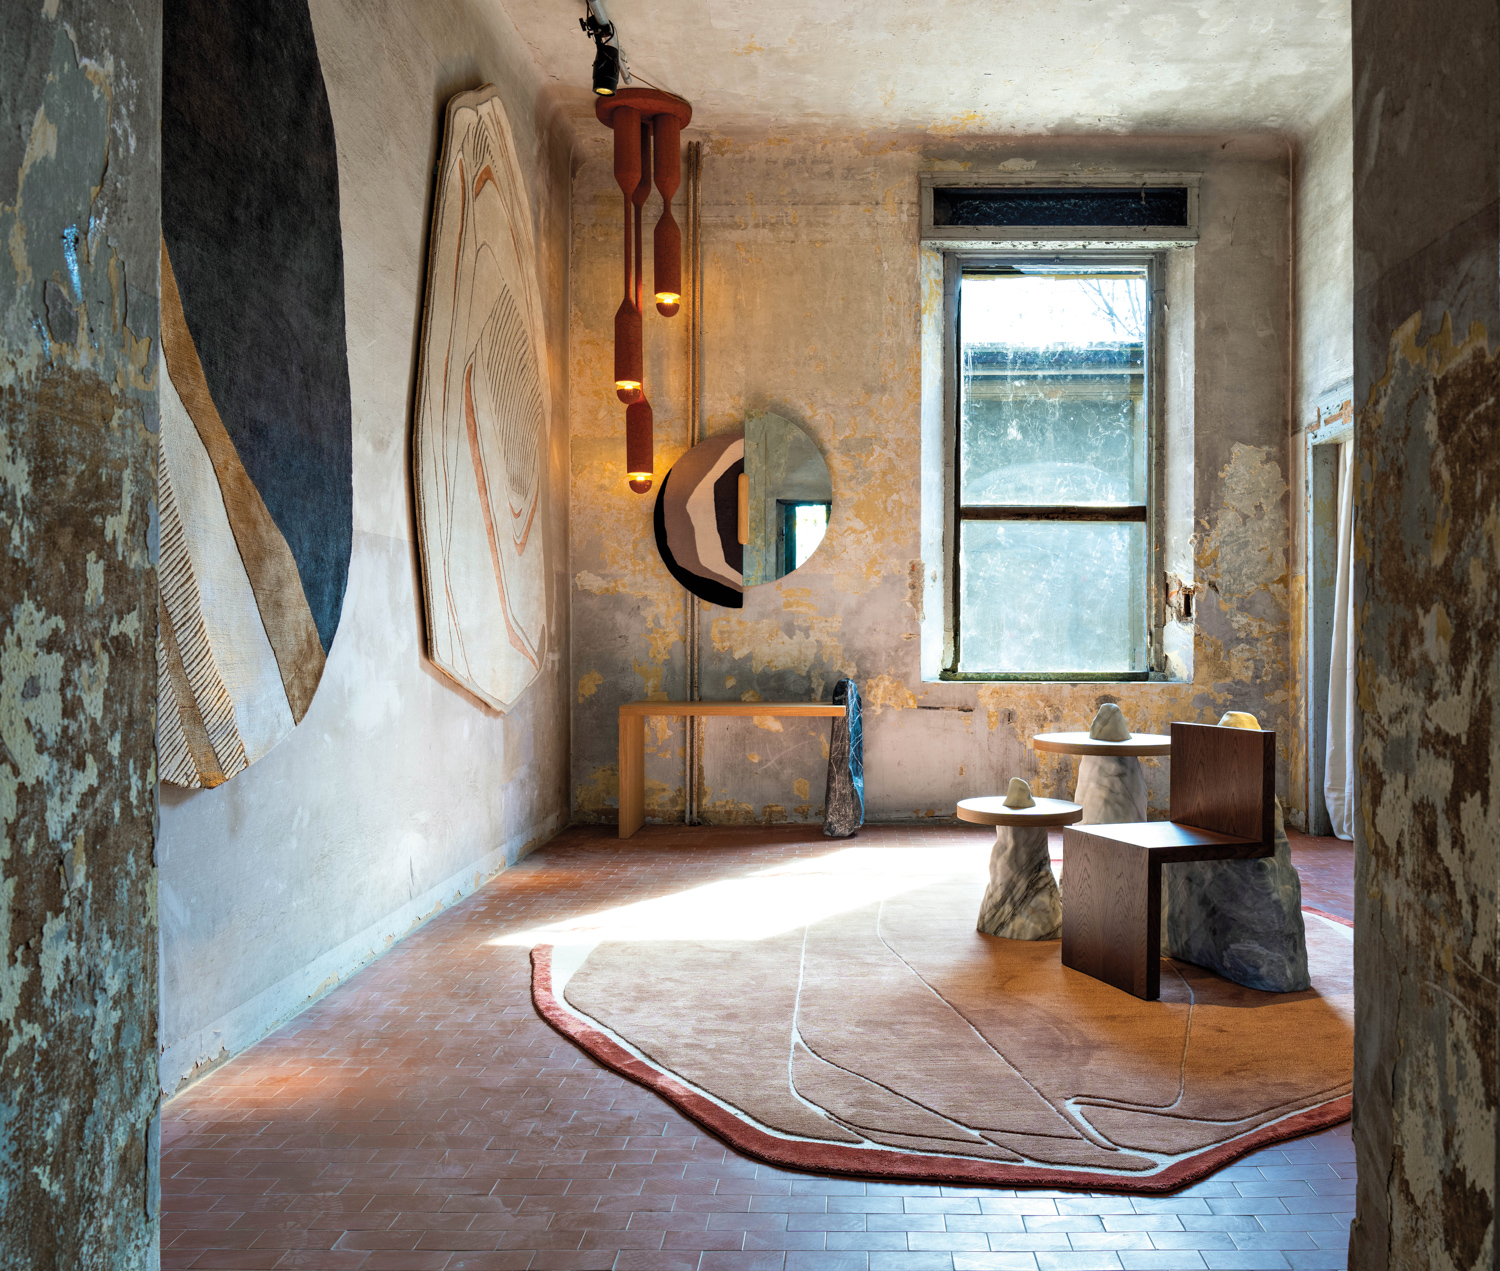 Room with sculptural rugs by Samantha Gallacher and furniture pieces made from marble and wood